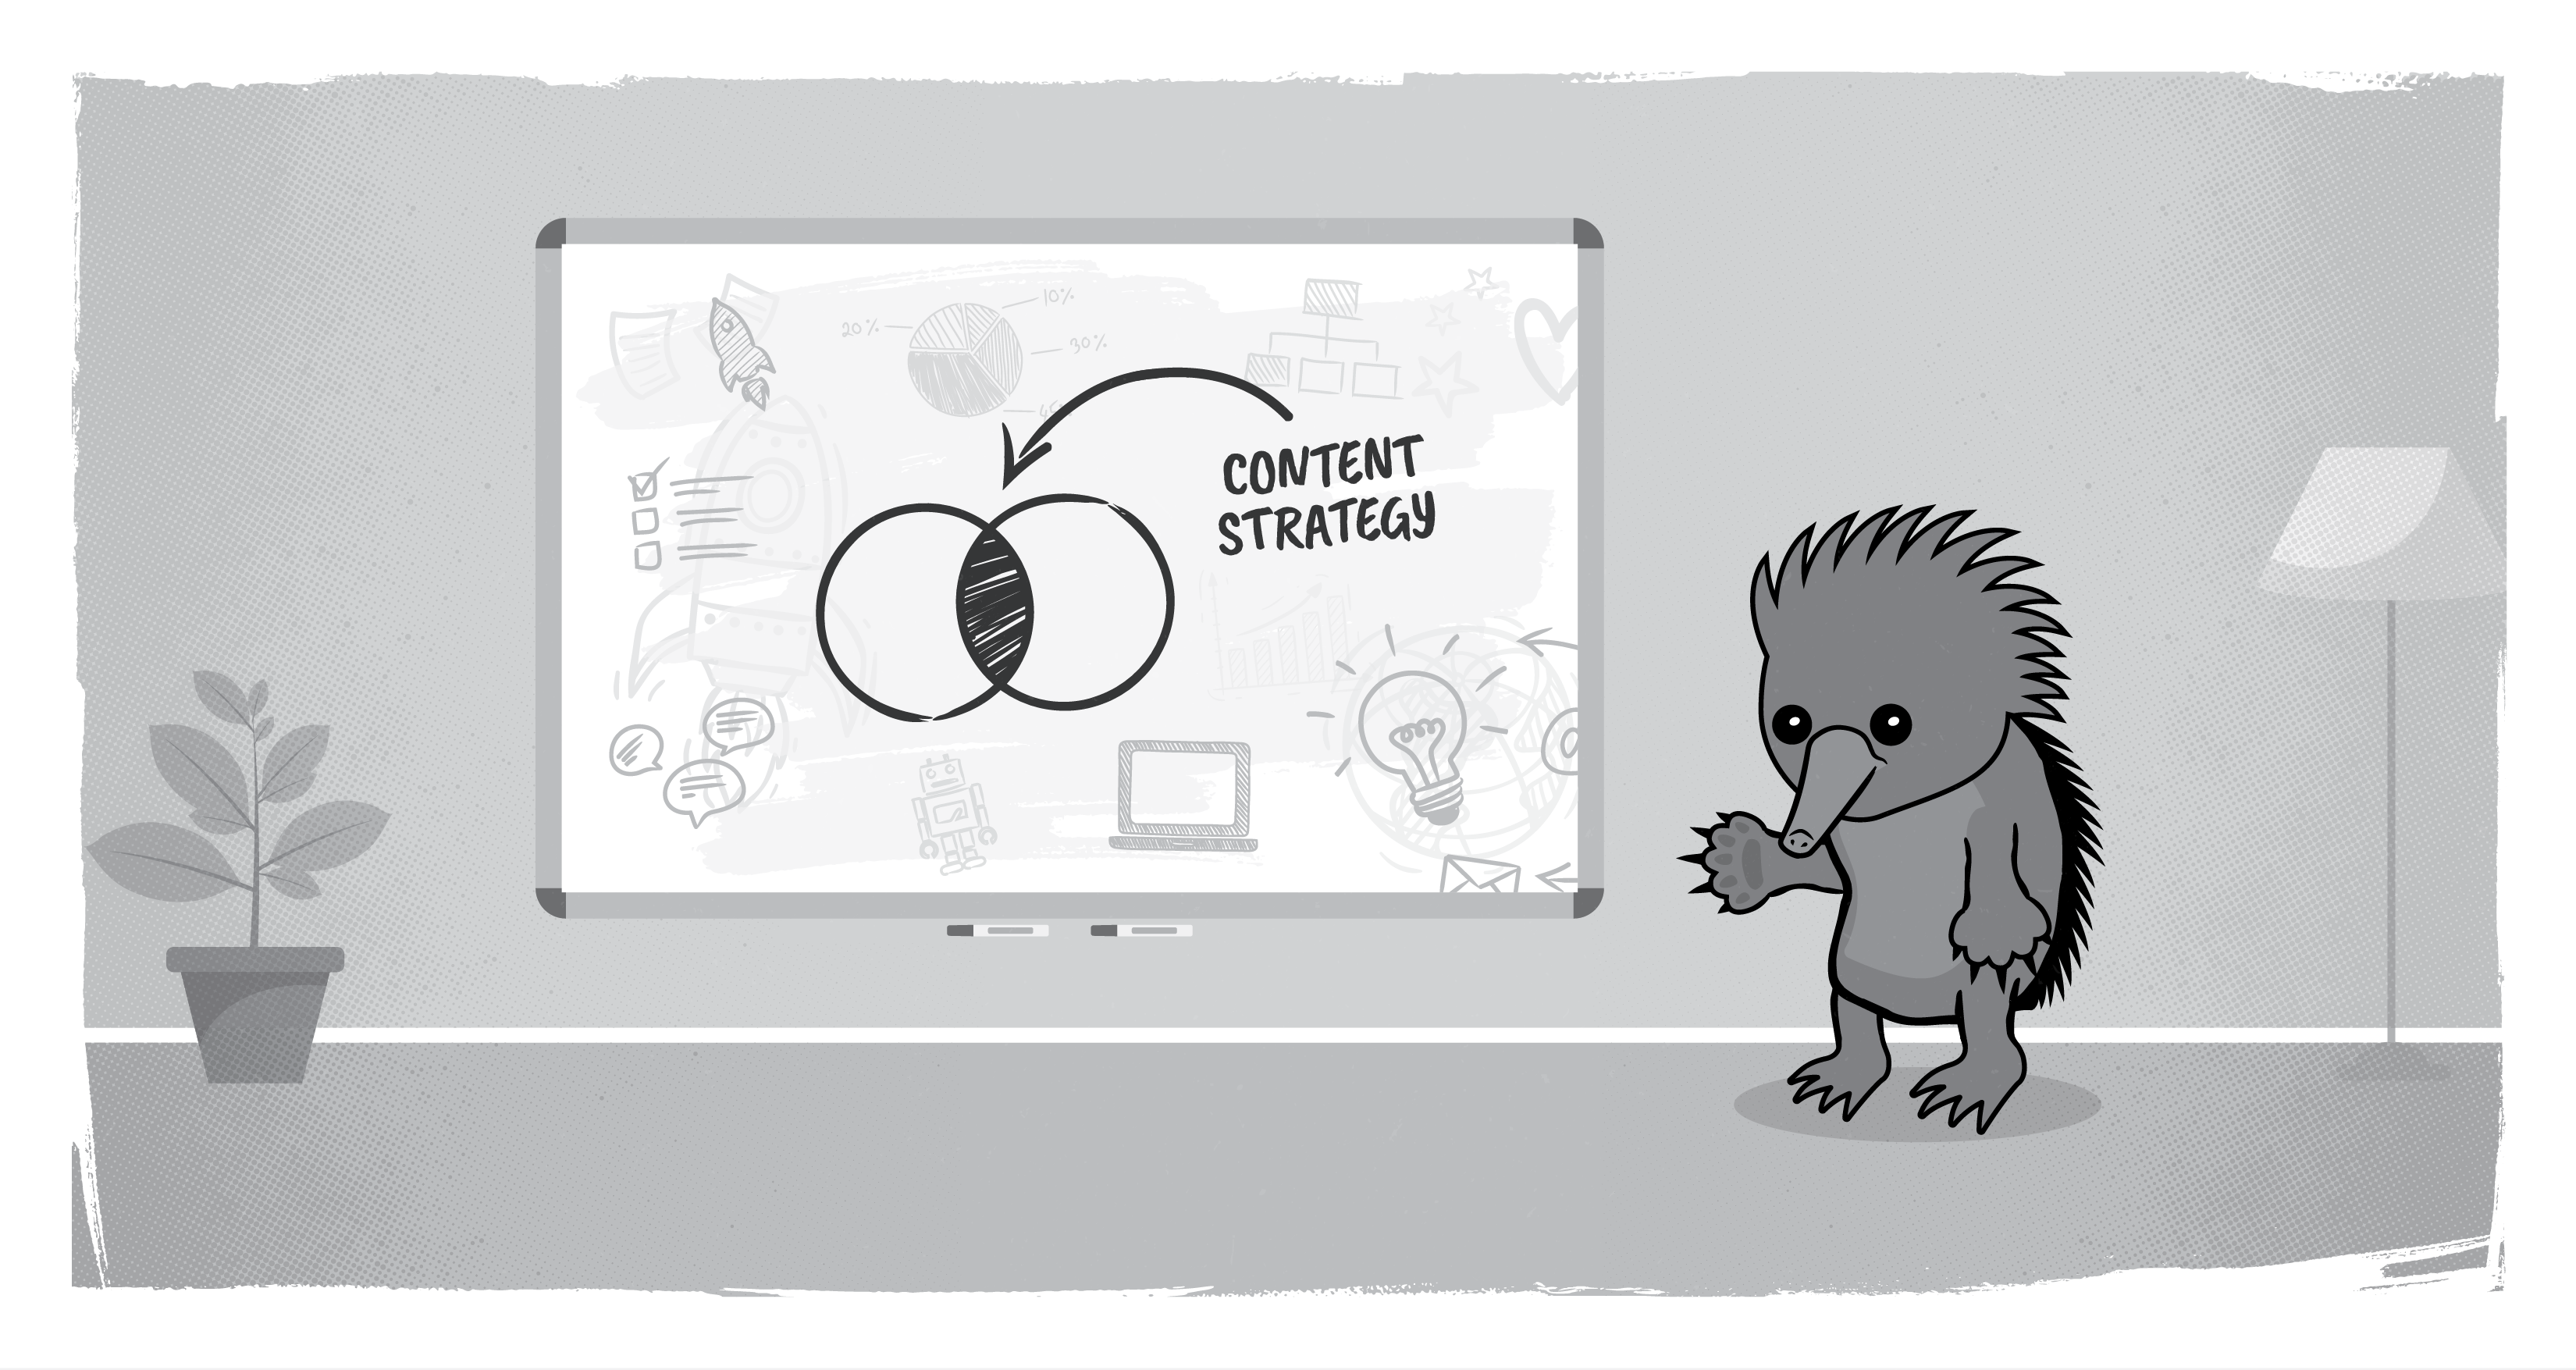 Echidna with a whiteboard writing "content strategy"